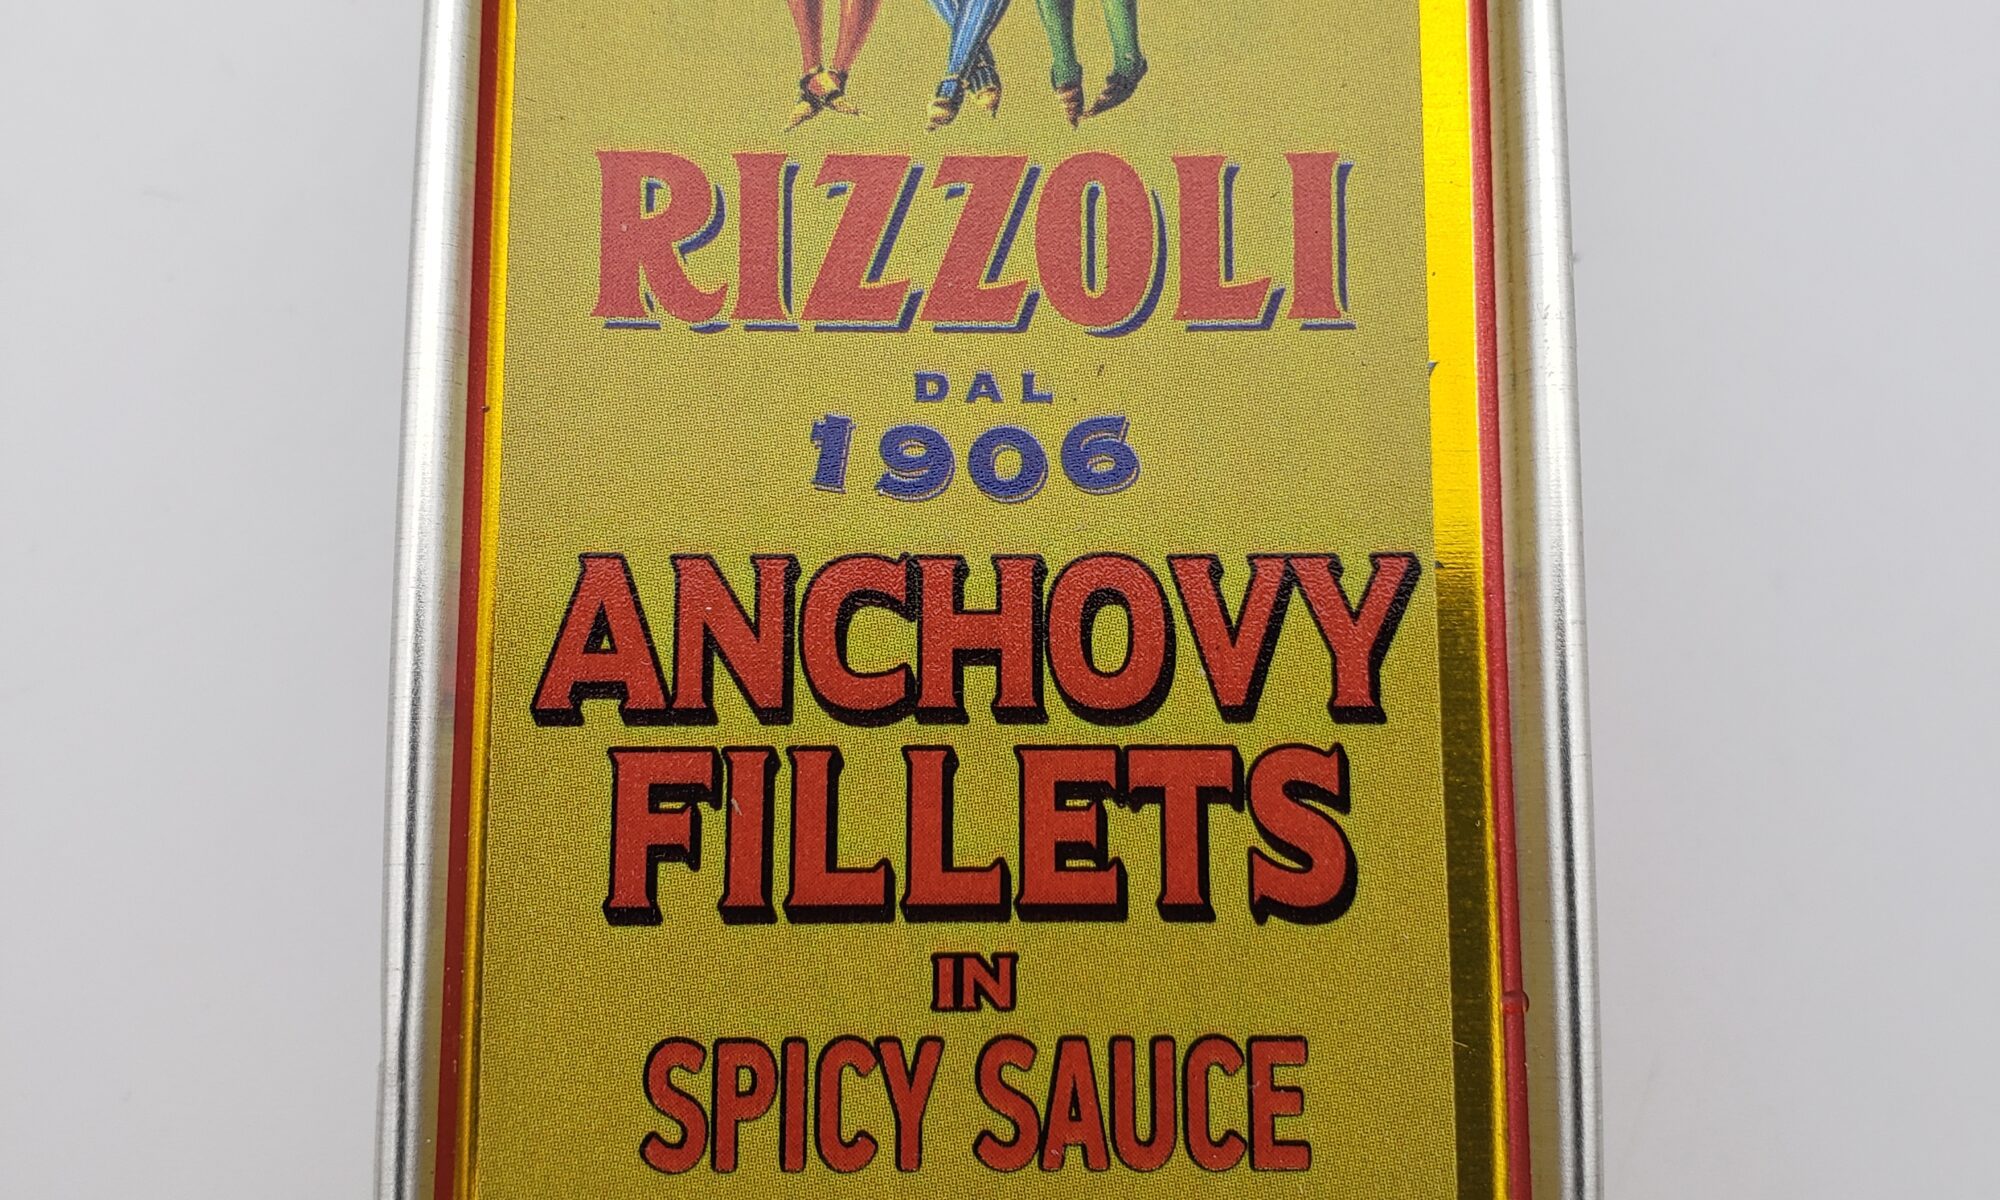 Image of Rizzoli anchovies in spicy sauce